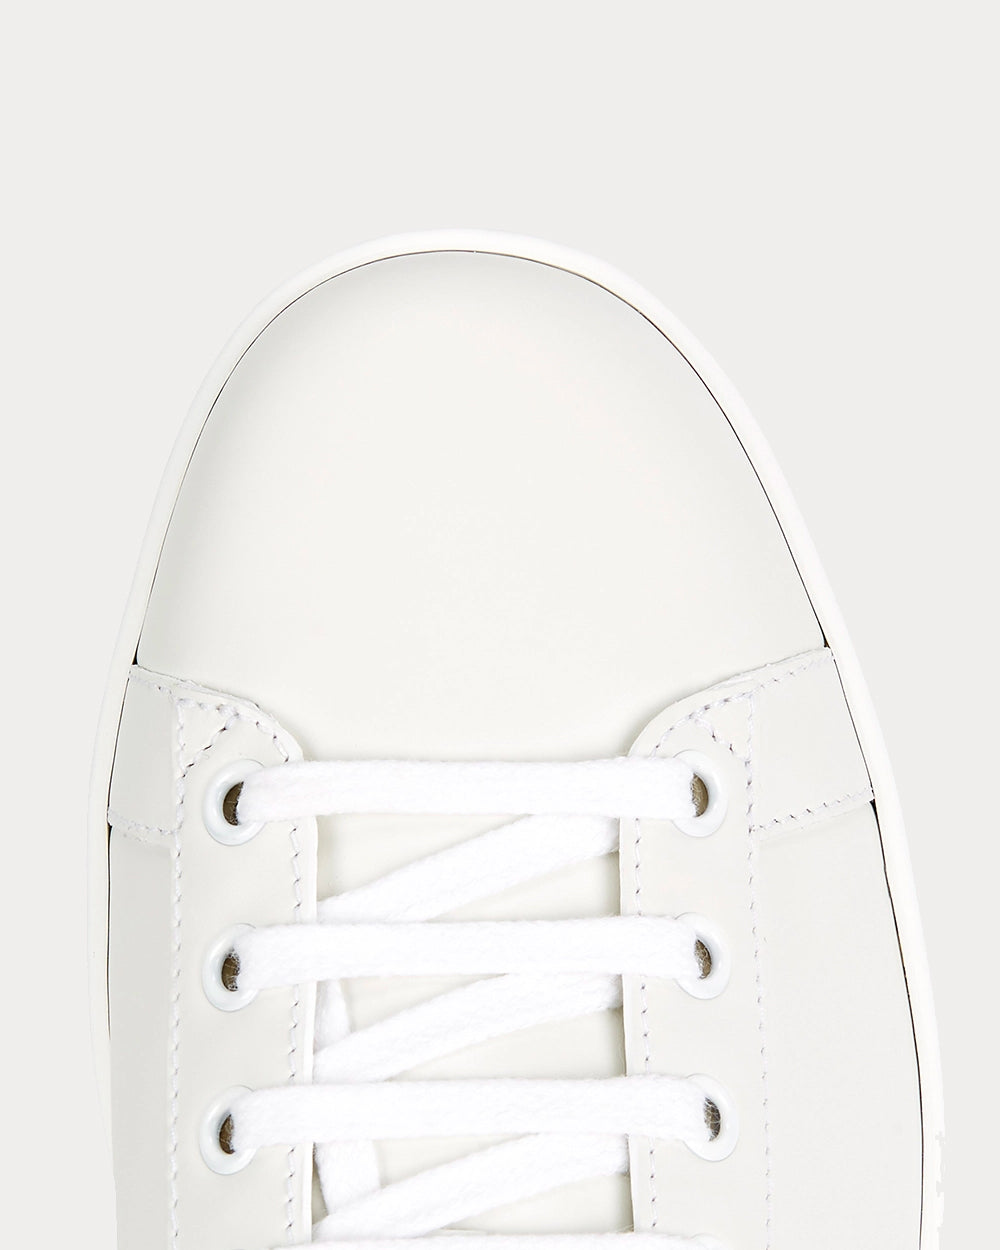 Gucci - Ace Interlocking G White / Pink Low Top Sneakers